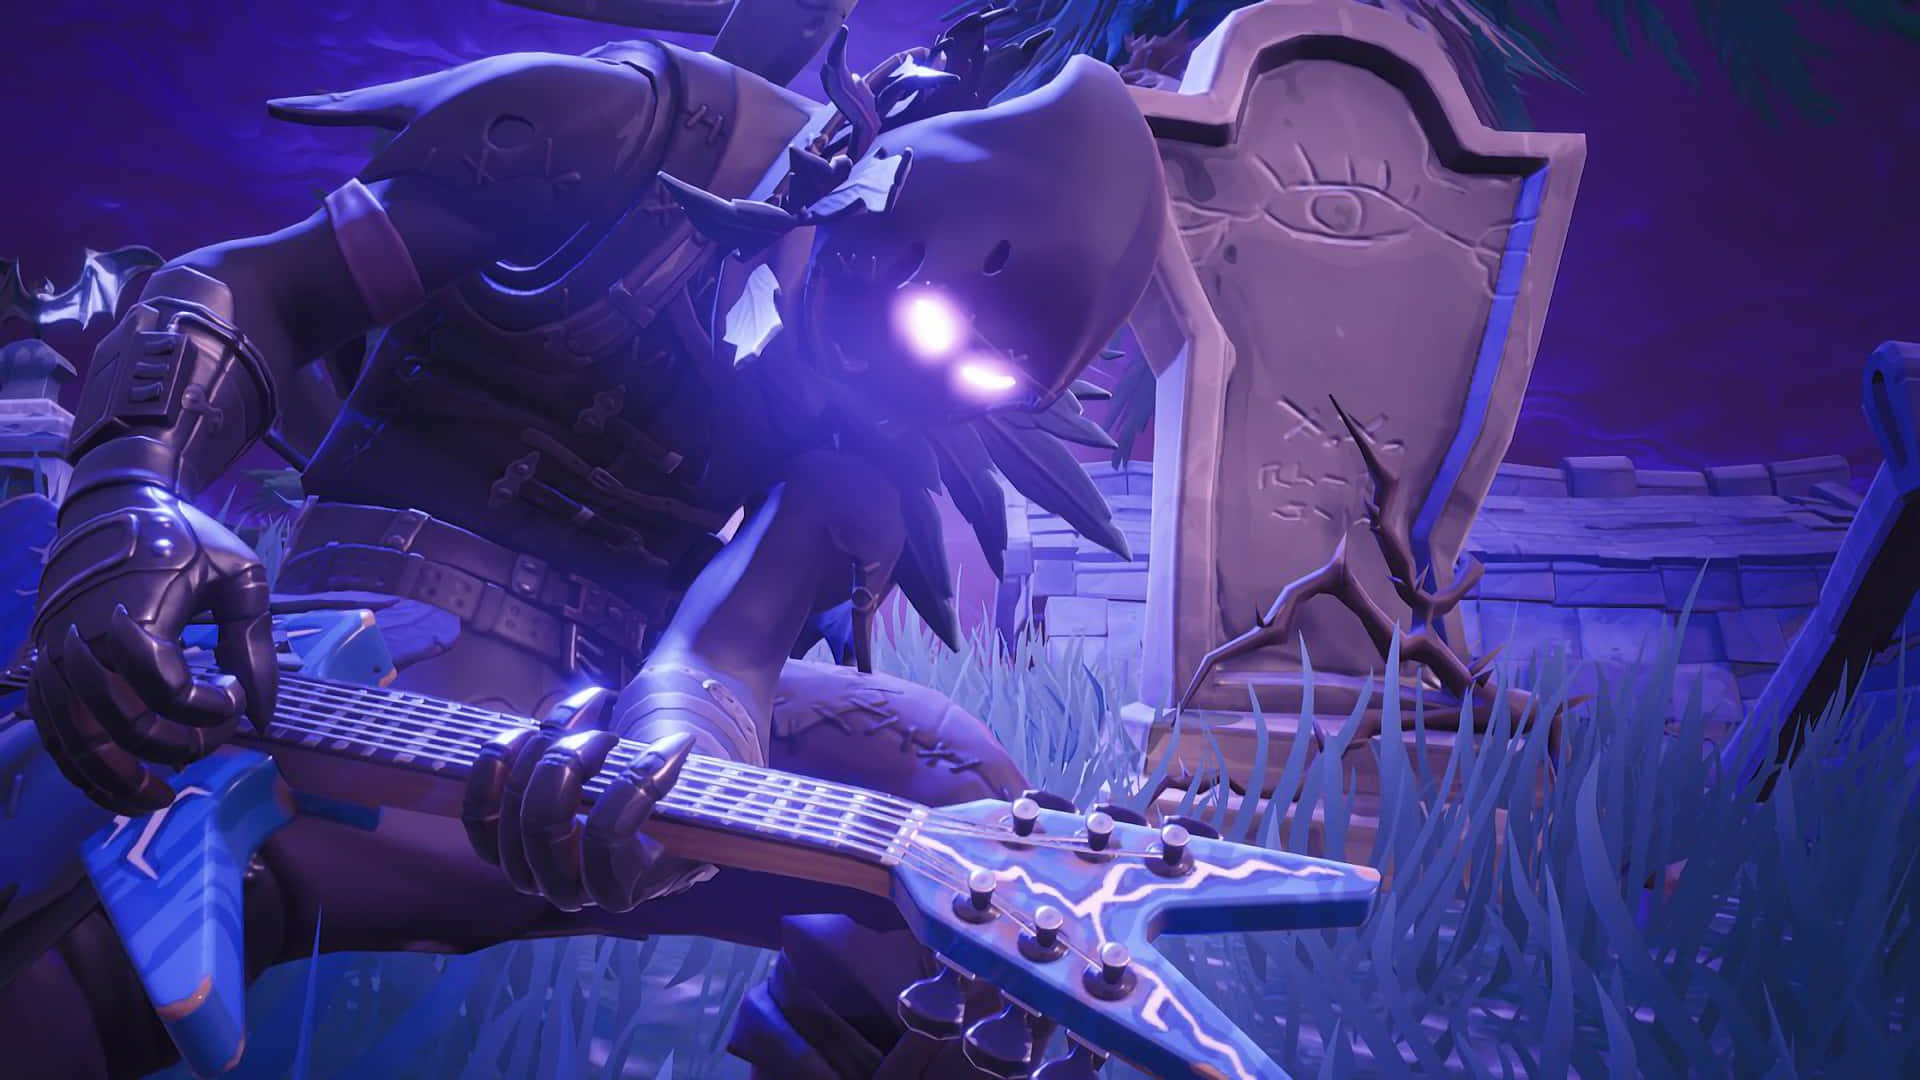 "Be the Raven King in Fortnite with the Raven Skin!" Wallpaper